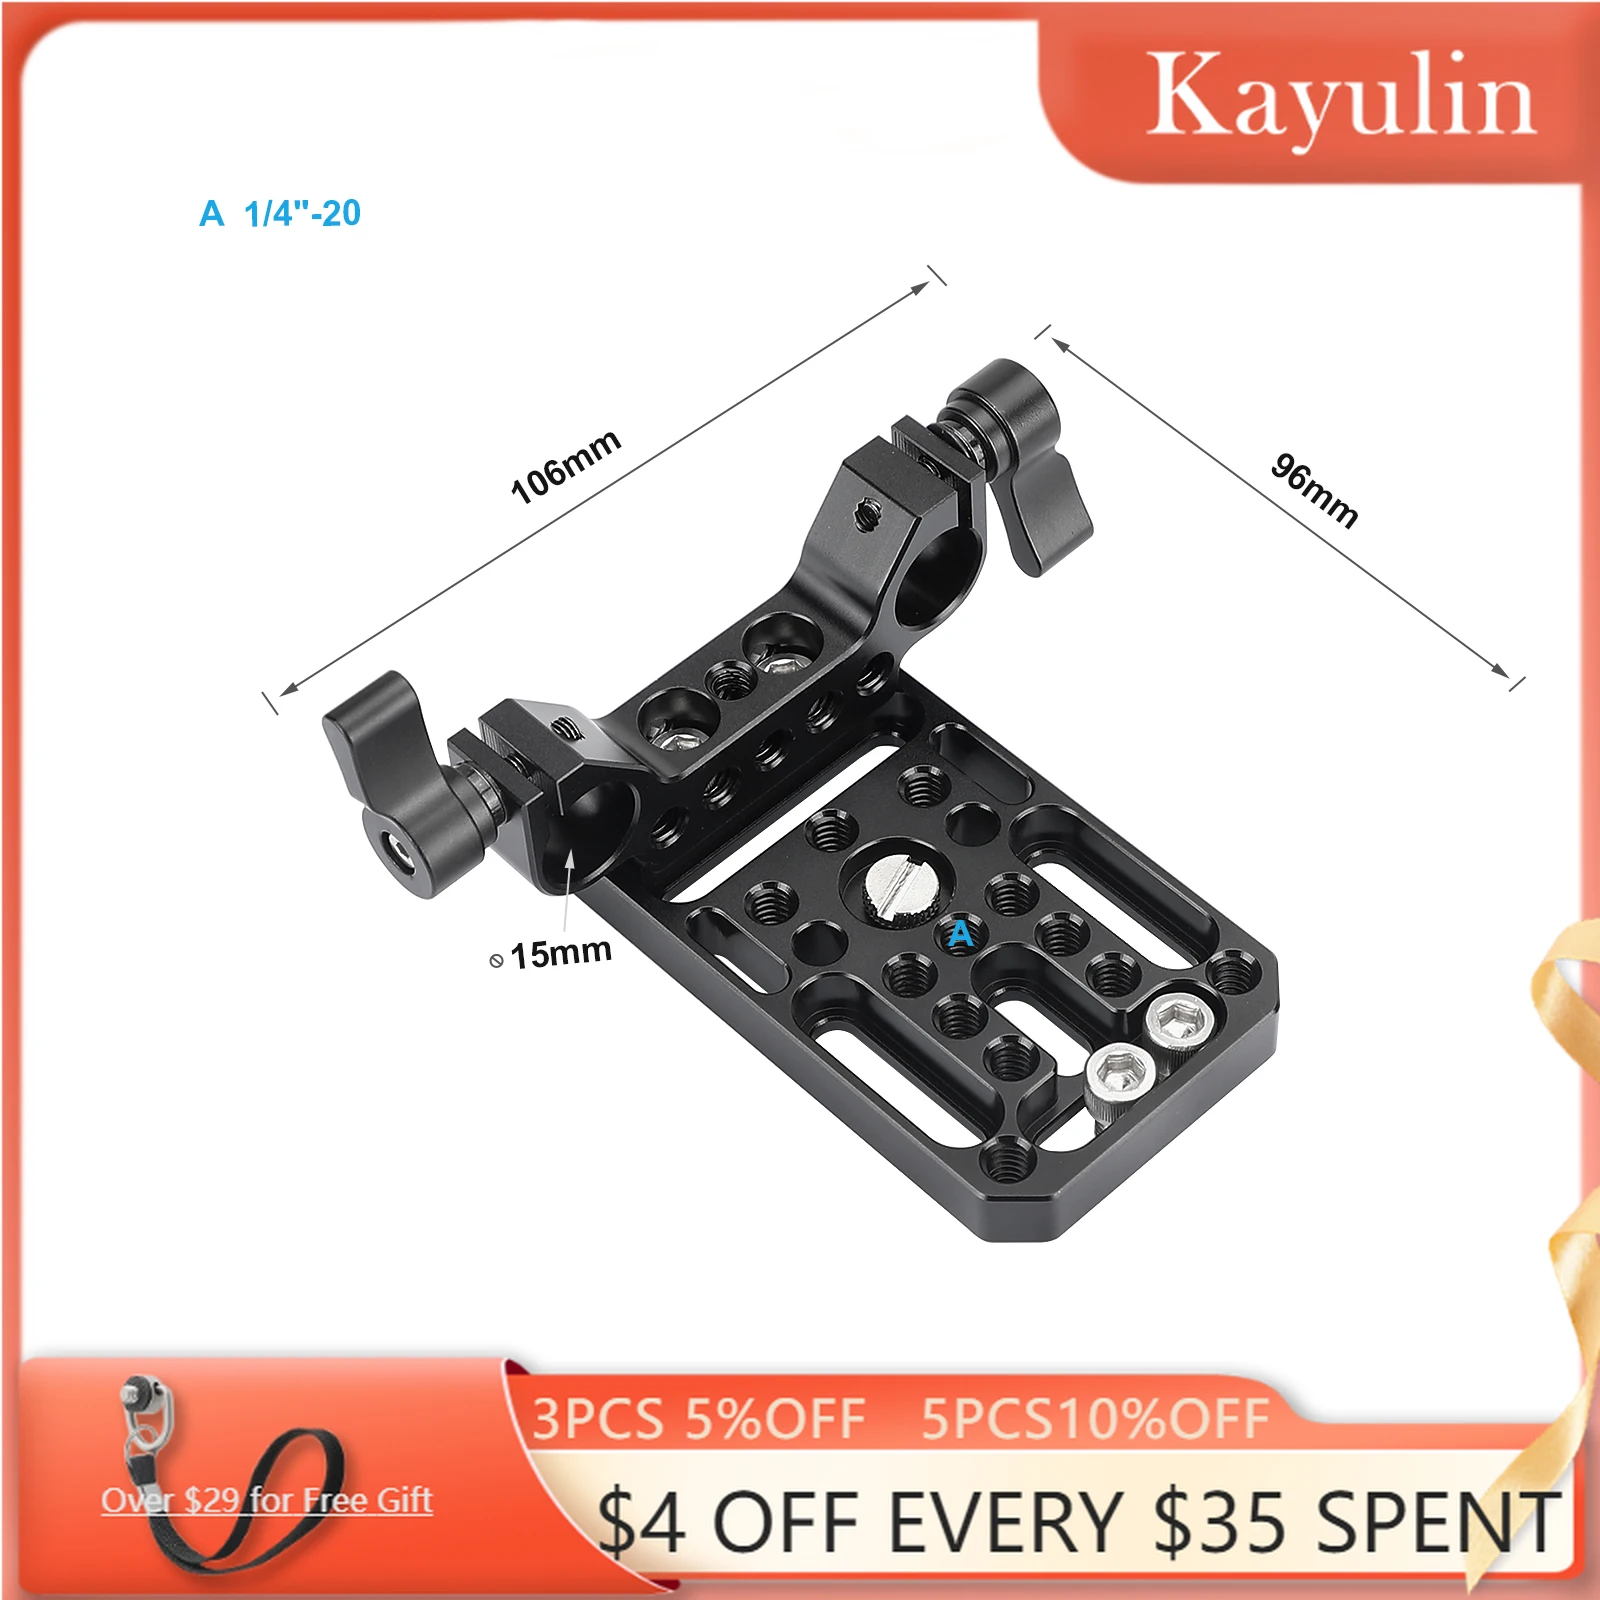 

Kayulin Universal Camera Baseplate Integrated With 15mm Dual Rod Clamp For Shoulder Support Rig Tripod or Cage